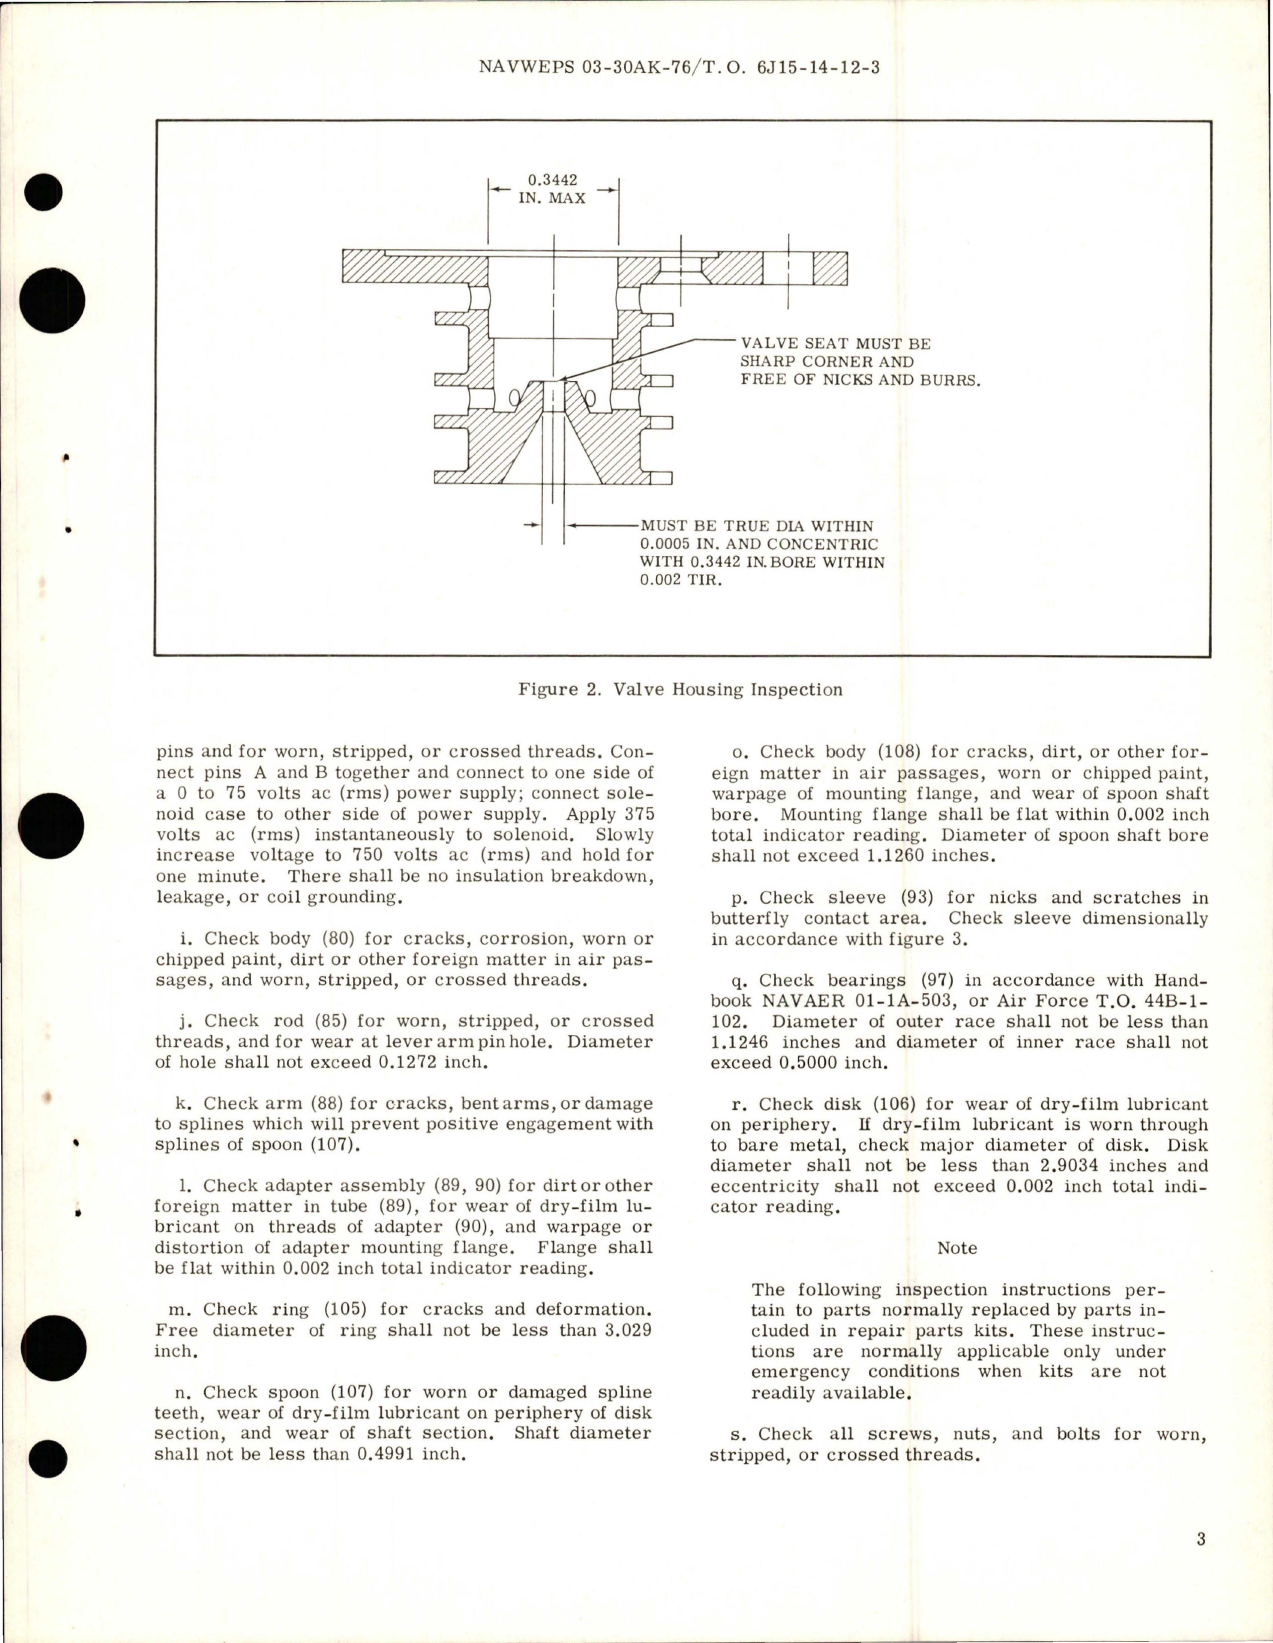 Sample page 5 from AirCorps Library document: Overhaul Instructions with Parts Breakdown for Vacuum and Vent Pressure Relief Valve - Part 108398-3